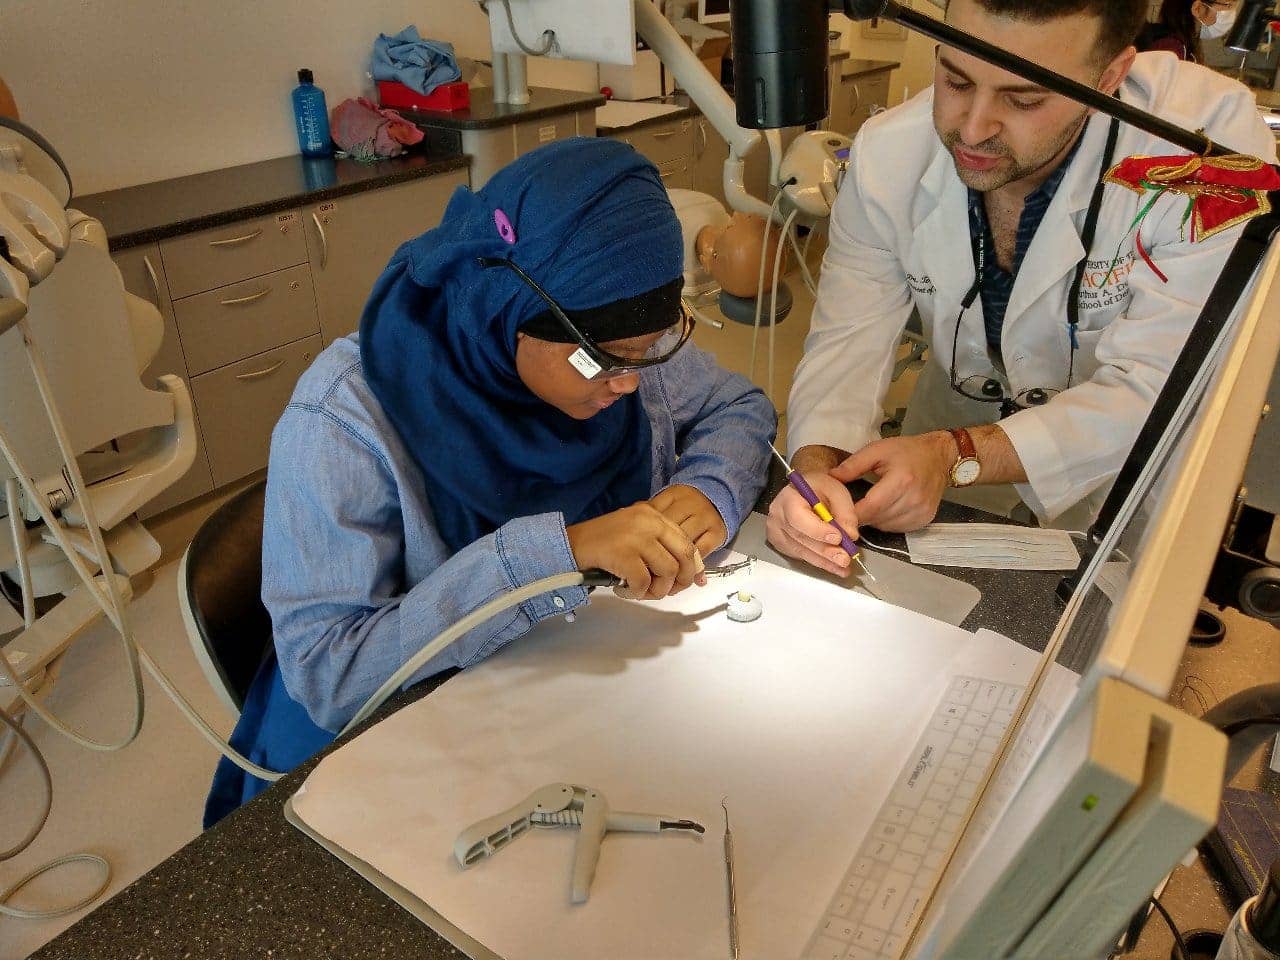 Najiyya-attends-University-of-the-Pacific-School-of-Dentistrys-Dental-Camp-in-San-Francisco-021018, Abdul-Haqq Khalifah turns sadness from the passing of his teenage daughter into fundraising for a cause, Culture Currents 